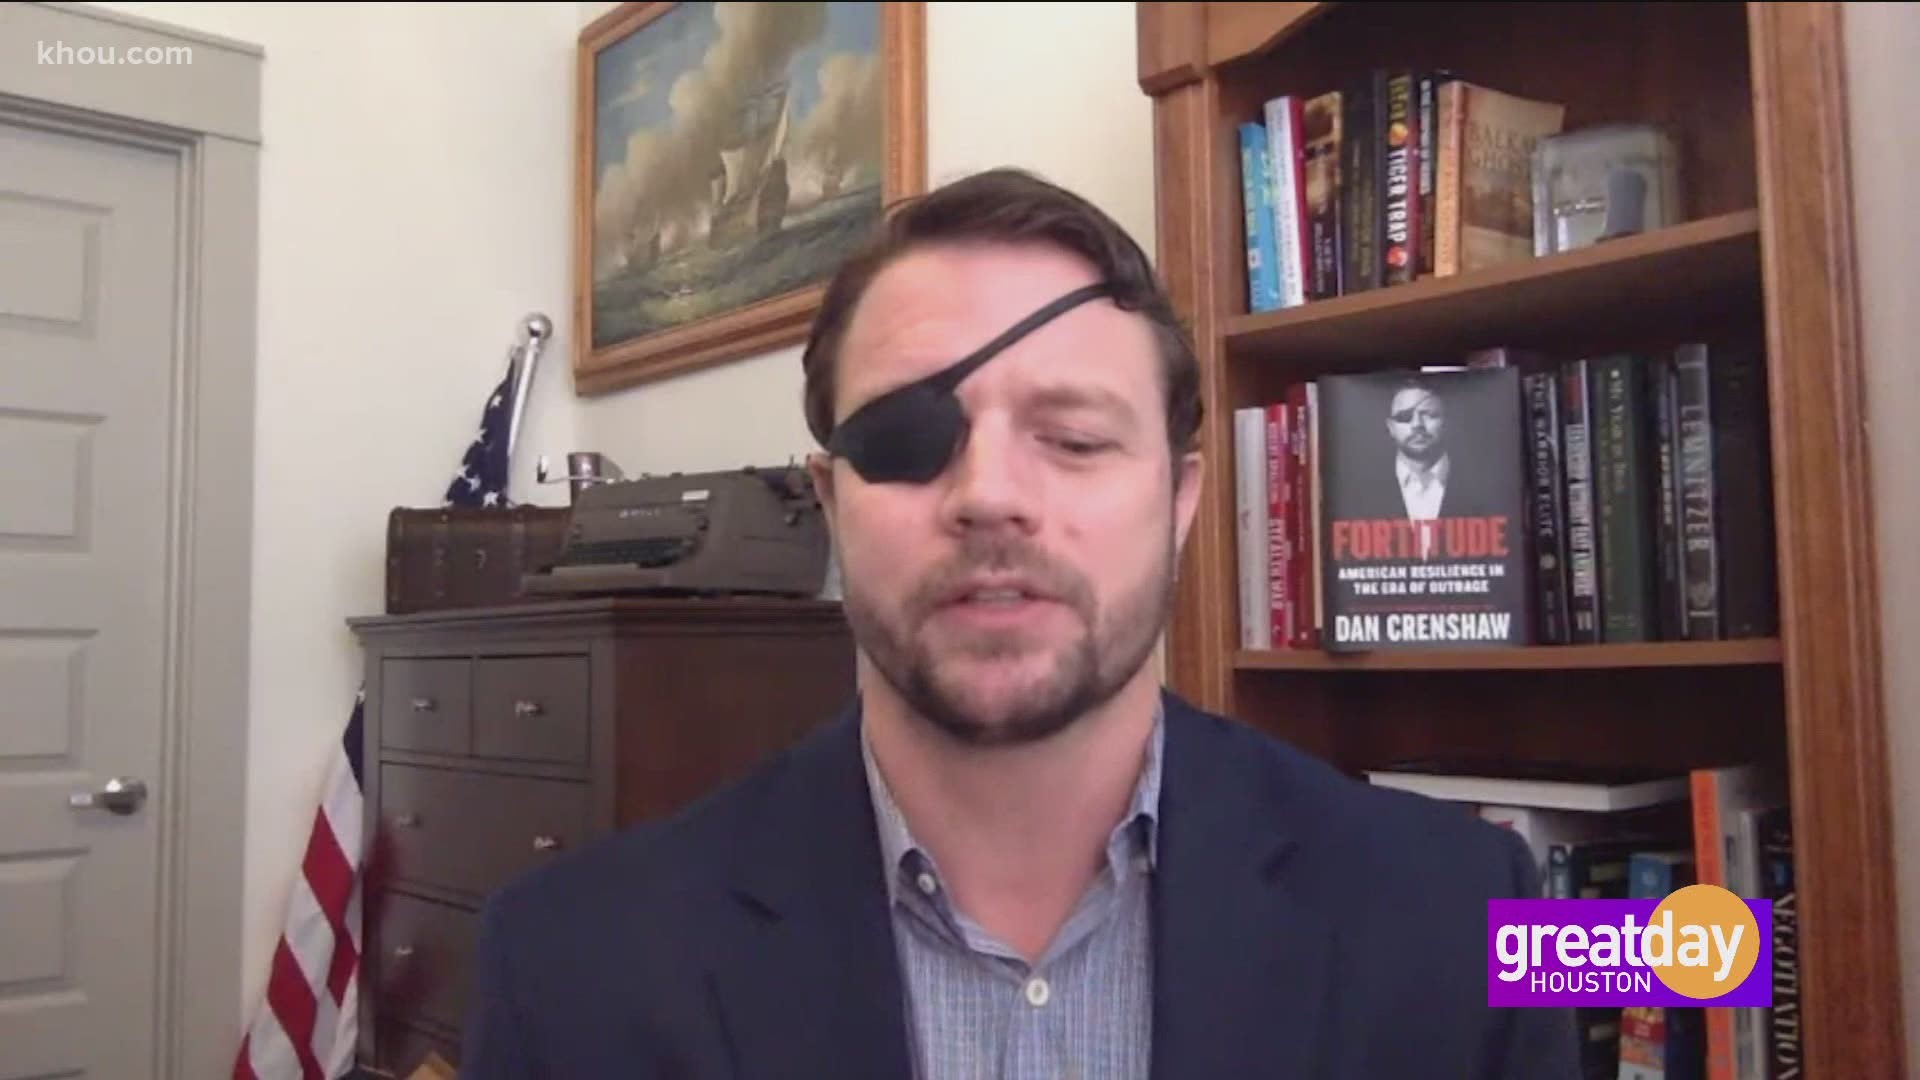 Rep. Dan Crenshaw discusses how fortitude can get you through times of crisis.